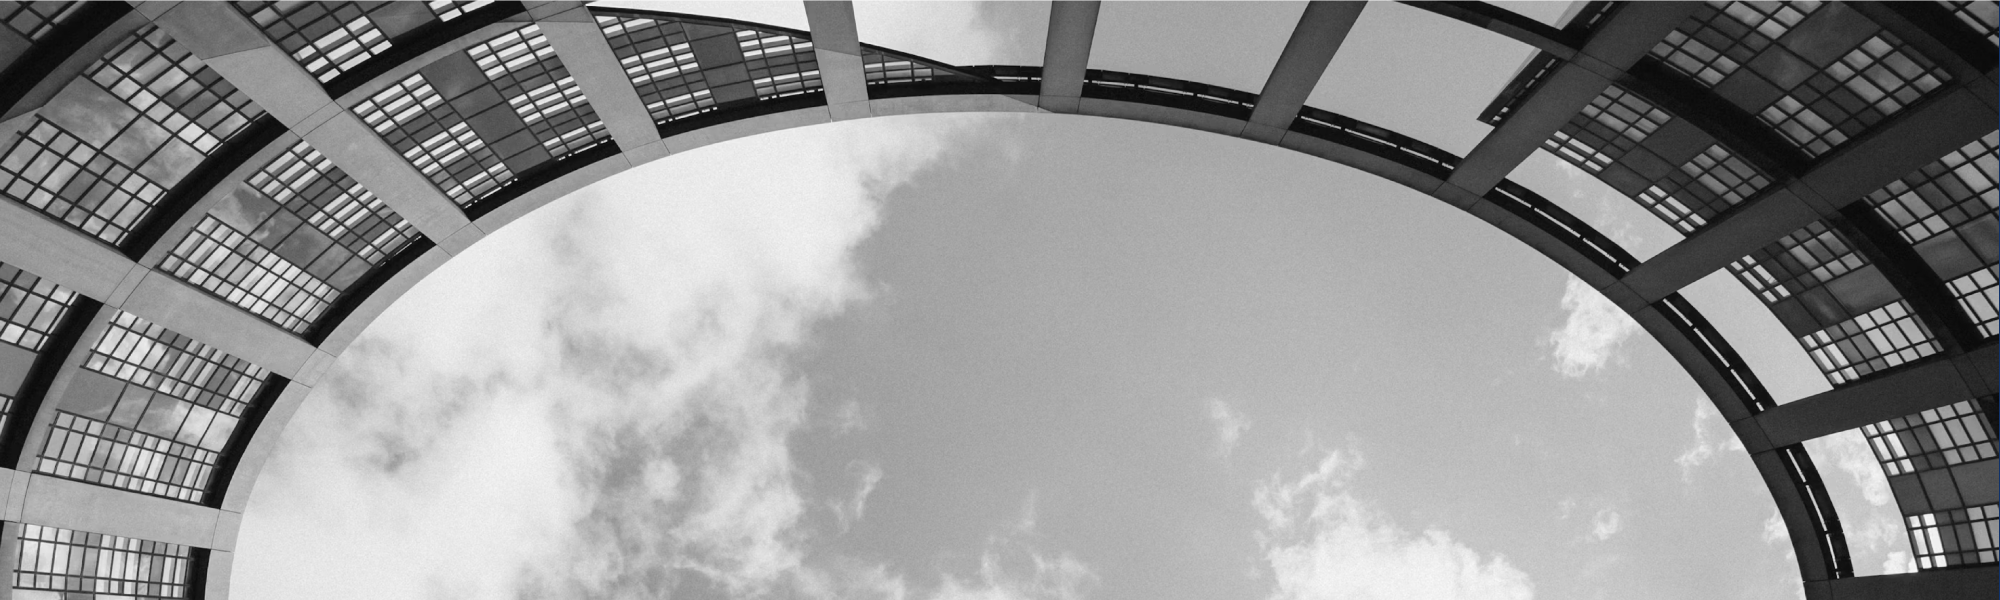 worm's view black and white photo of building and sky 